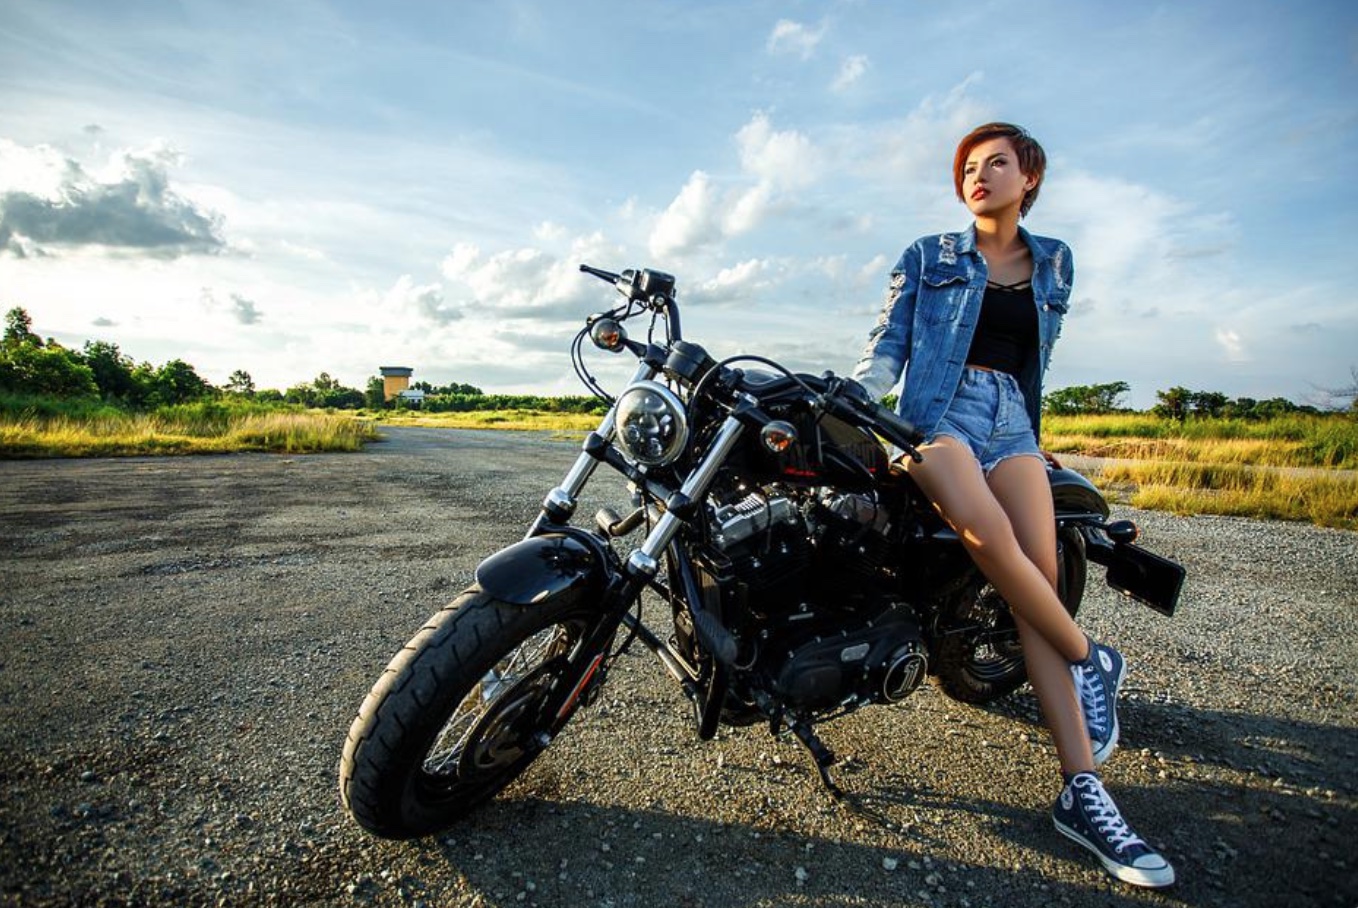 Woman in shorts leaning on motorcycle; image by Minh1857, via Pexels.com